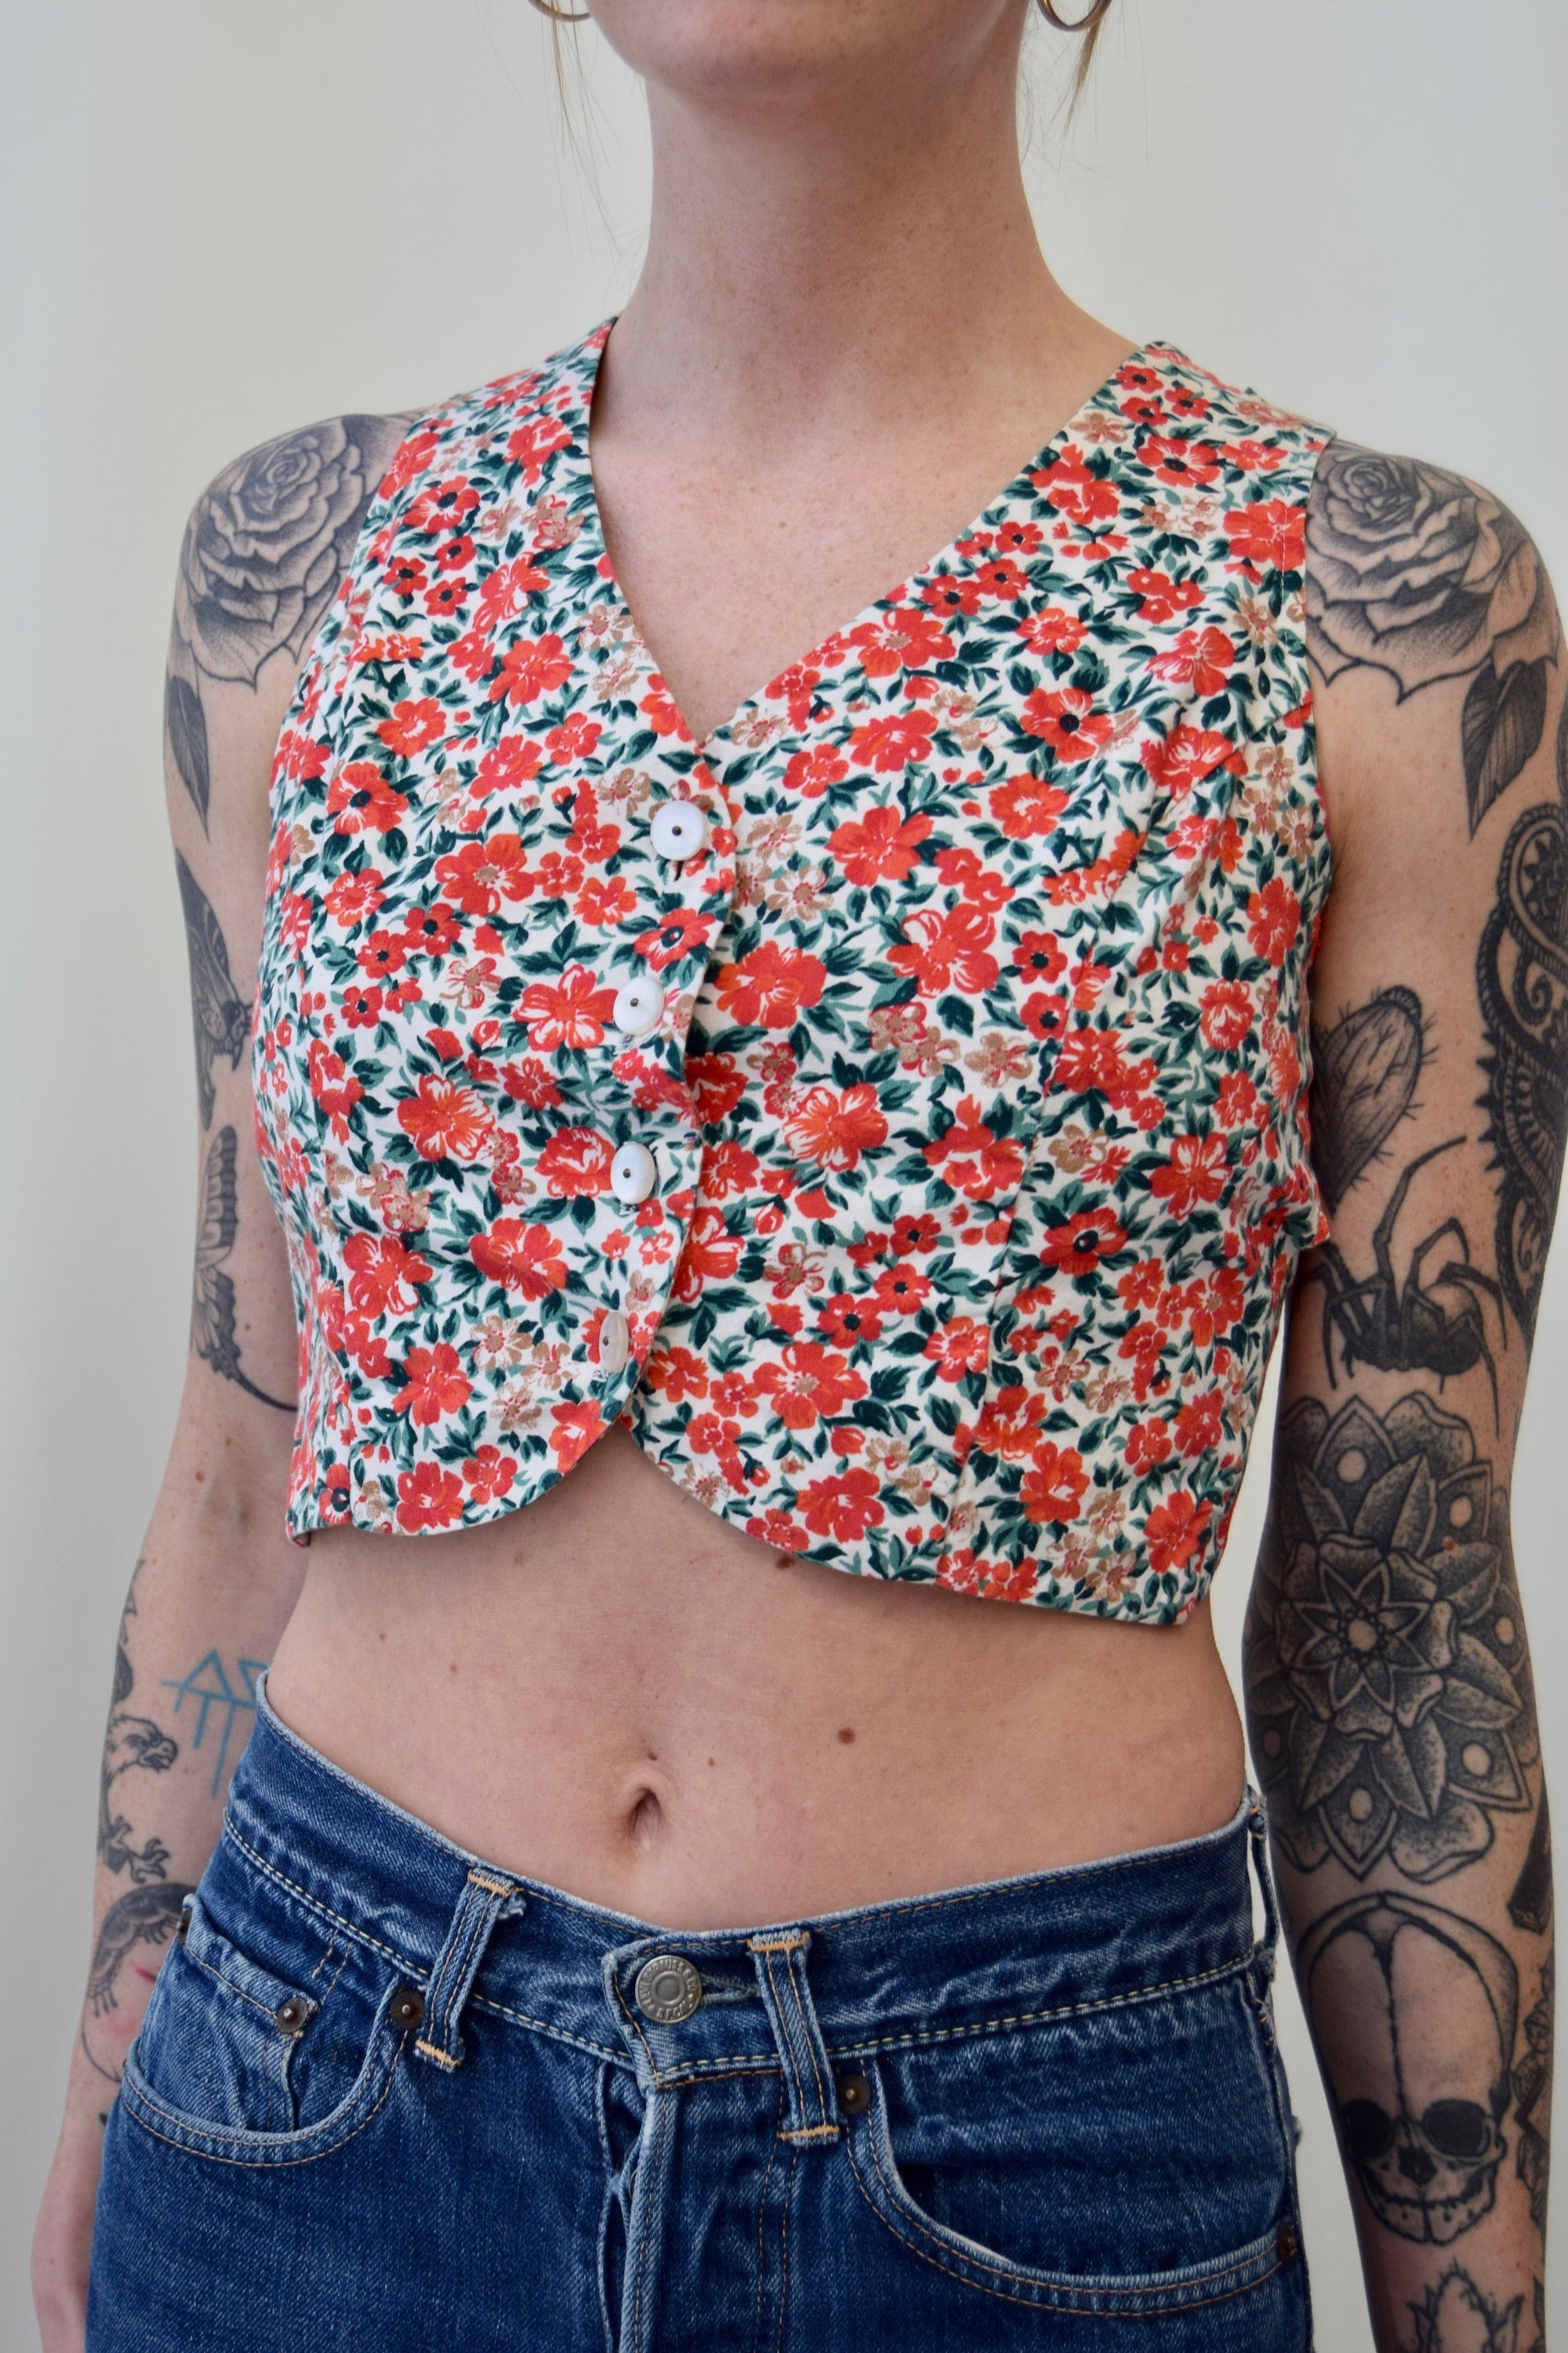 90's Floral Woven Strapped Crop Top